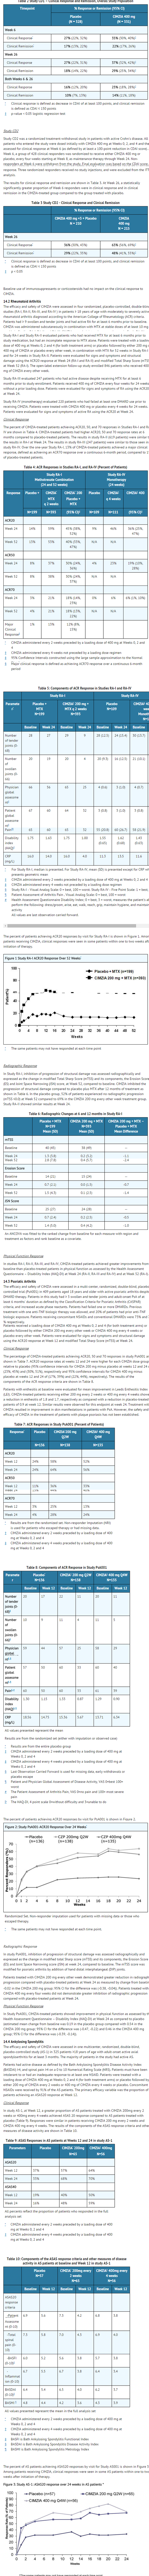 File:Cimia 2 Clinical studies.png